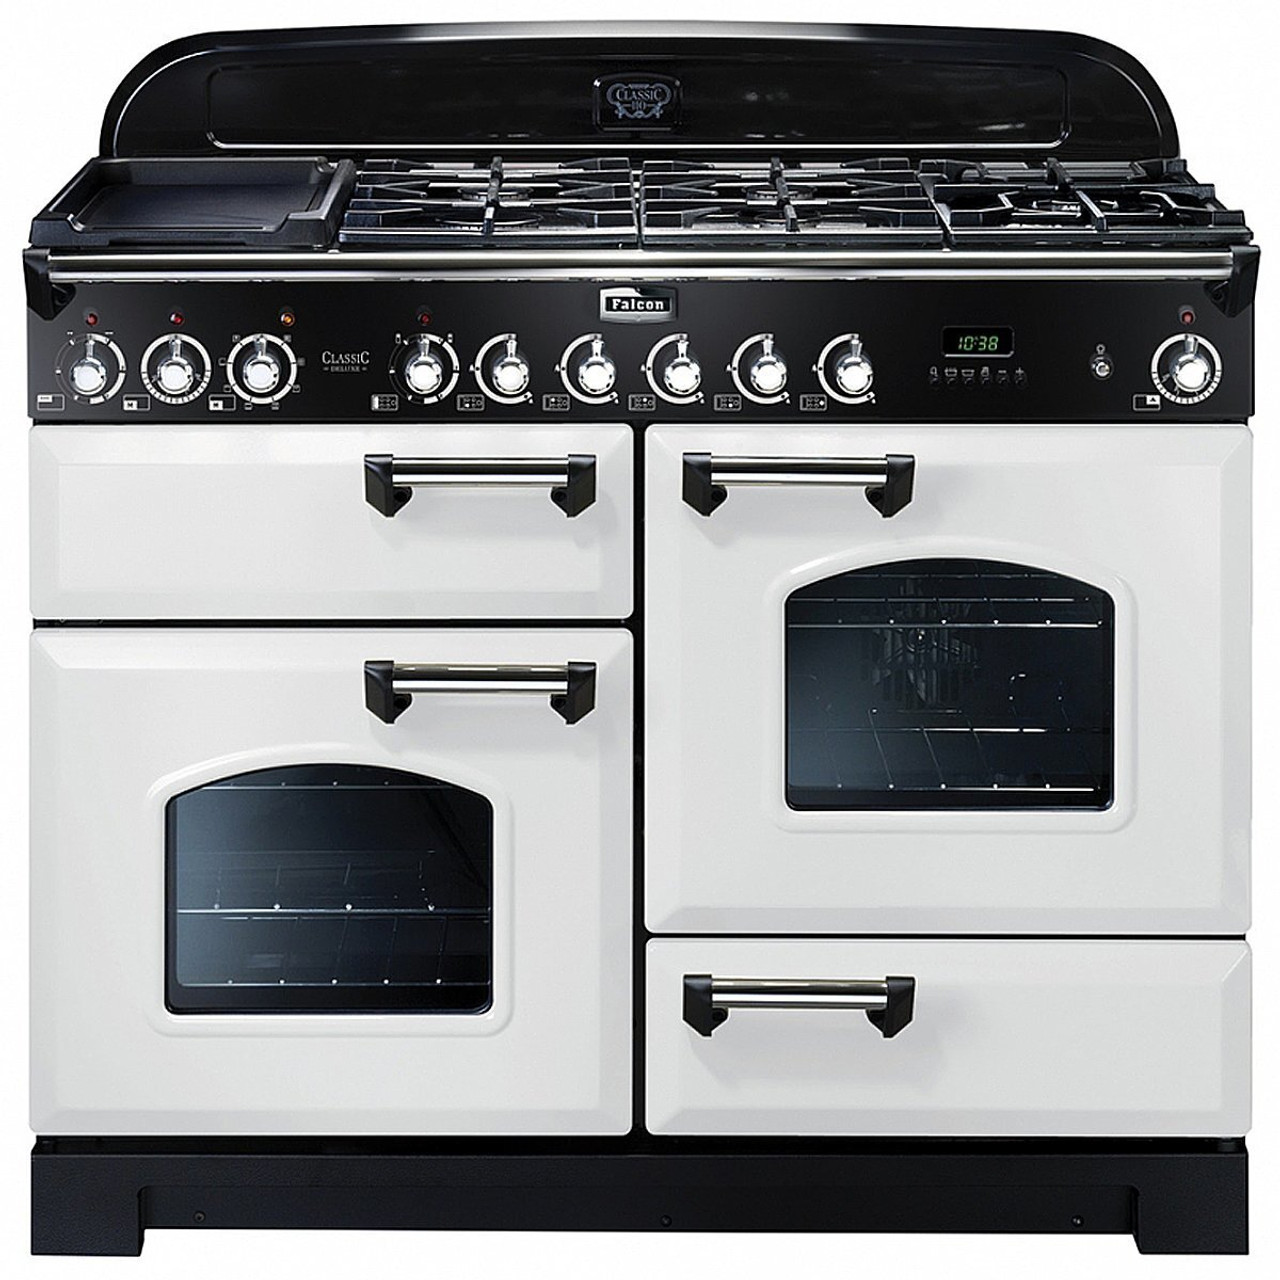 CDL110DFWHCH - 110cm Freestanding Dual Fuel Oven/Stove  - White